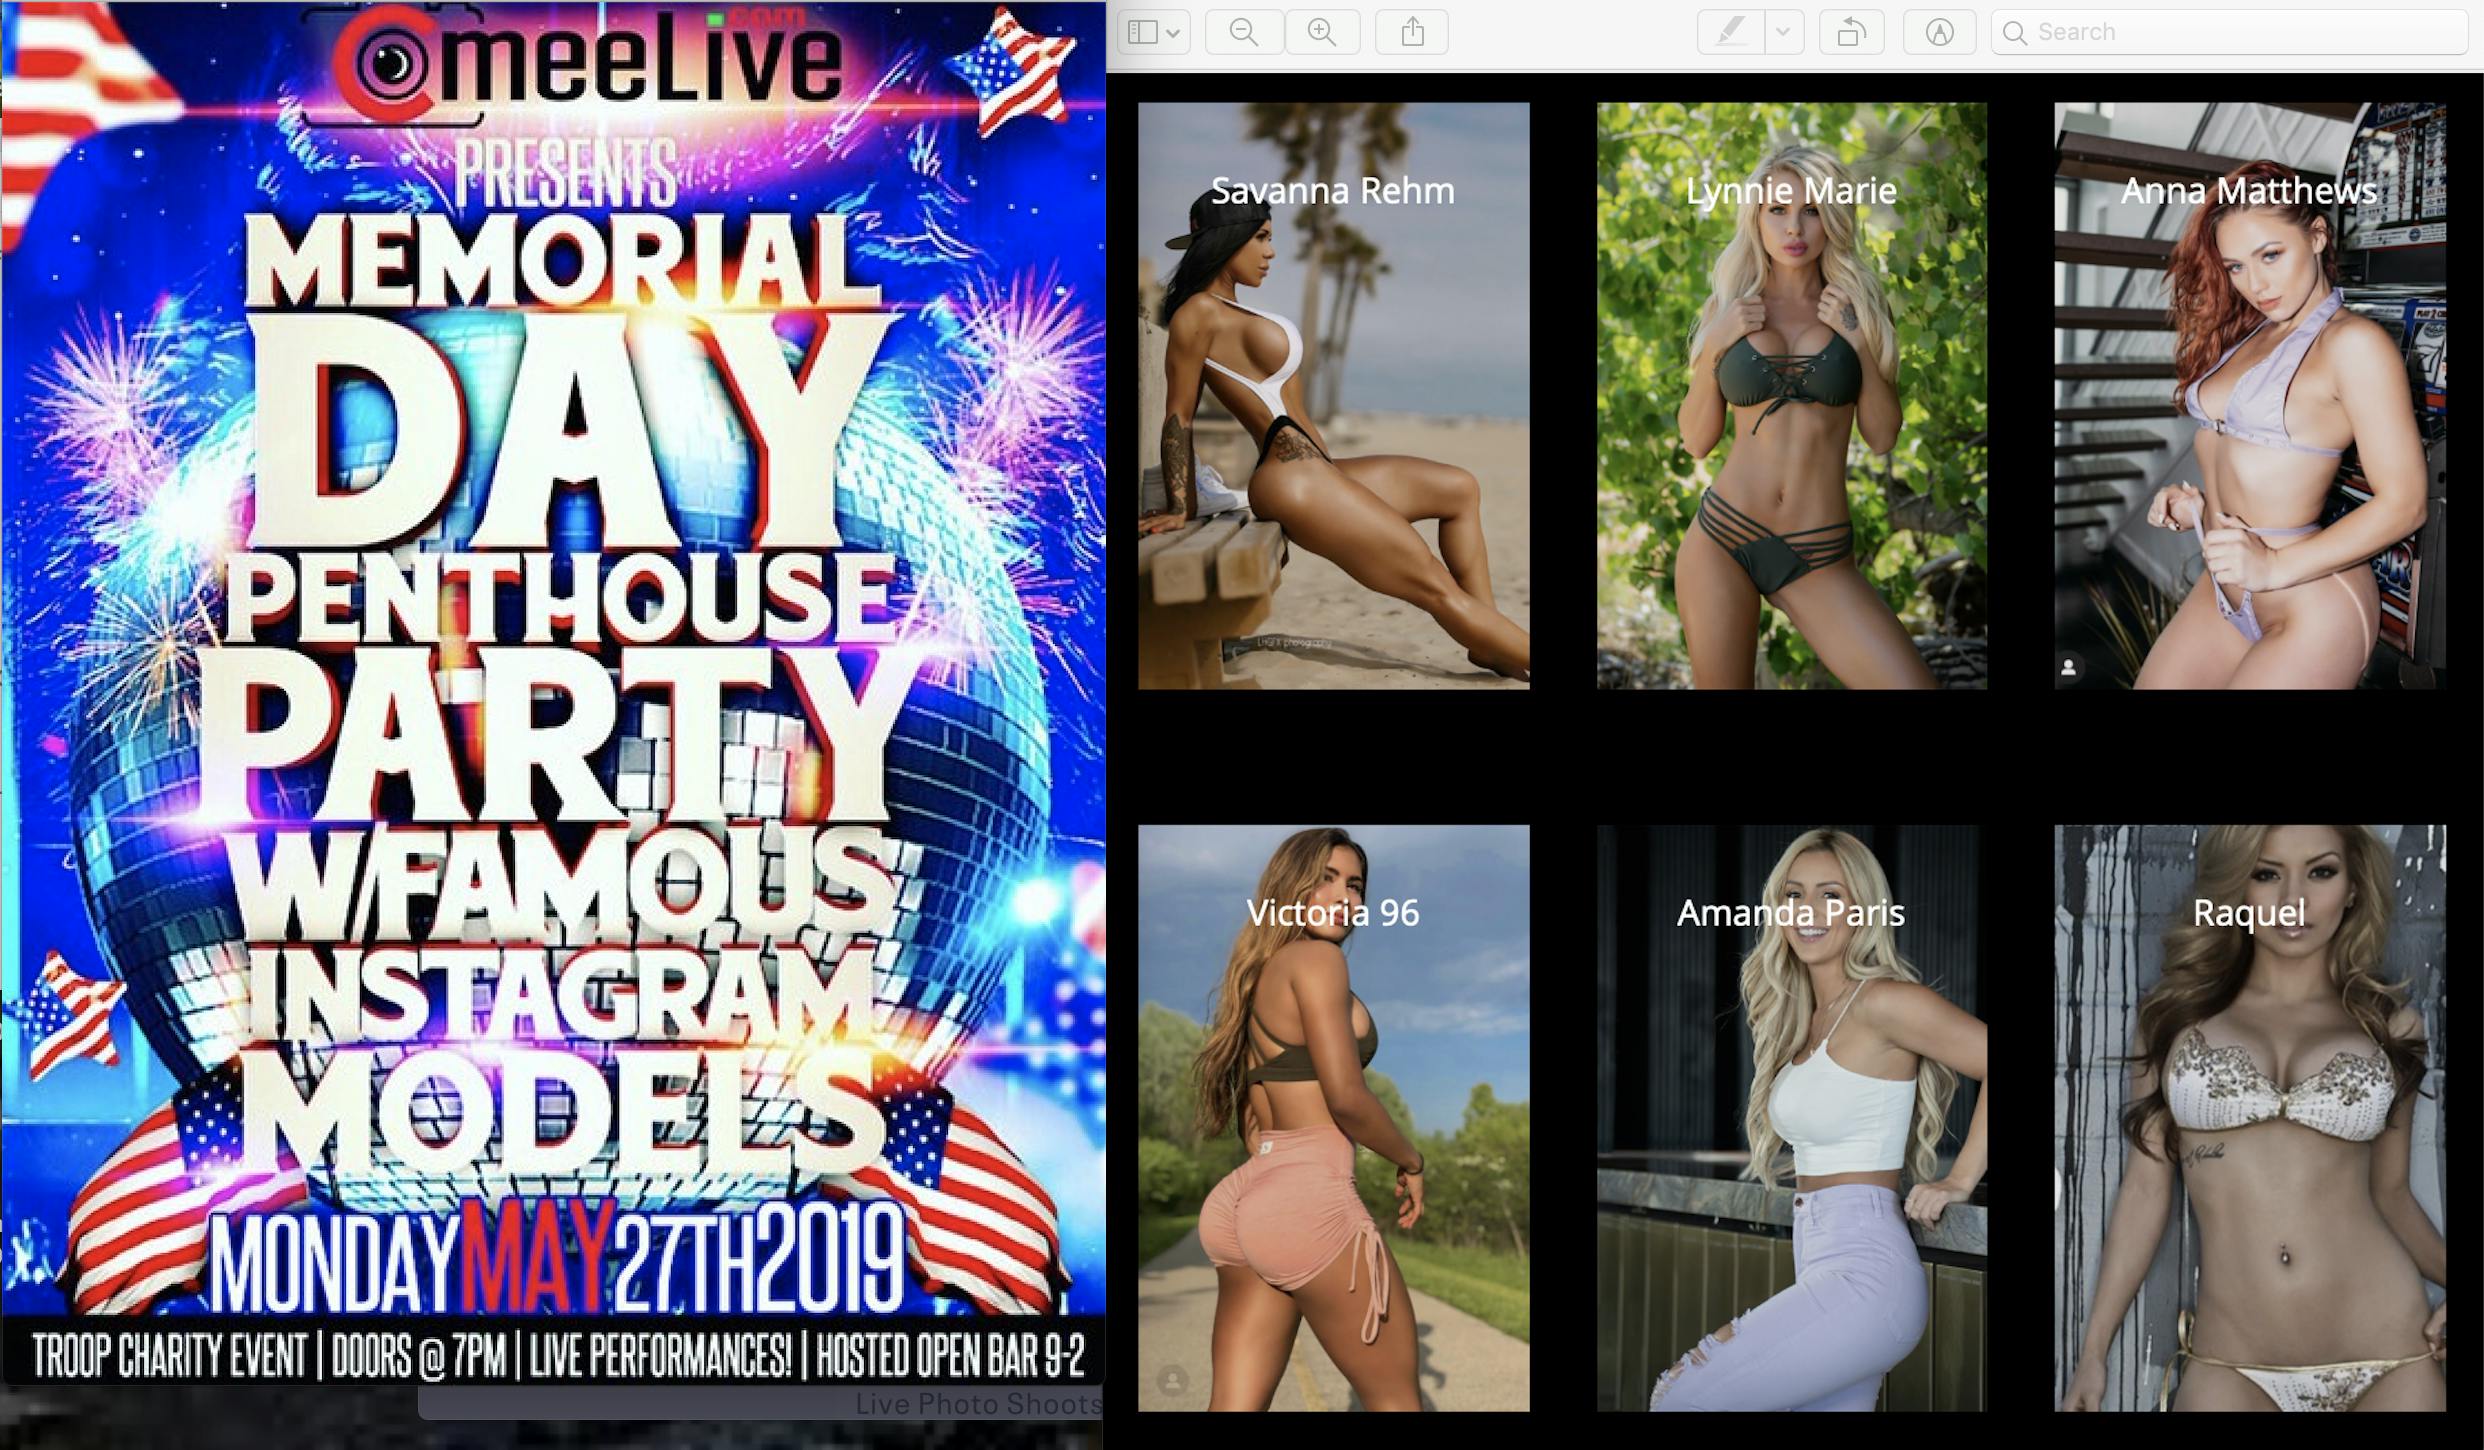 Memorial Day Penthouse Party with Famous IG Models